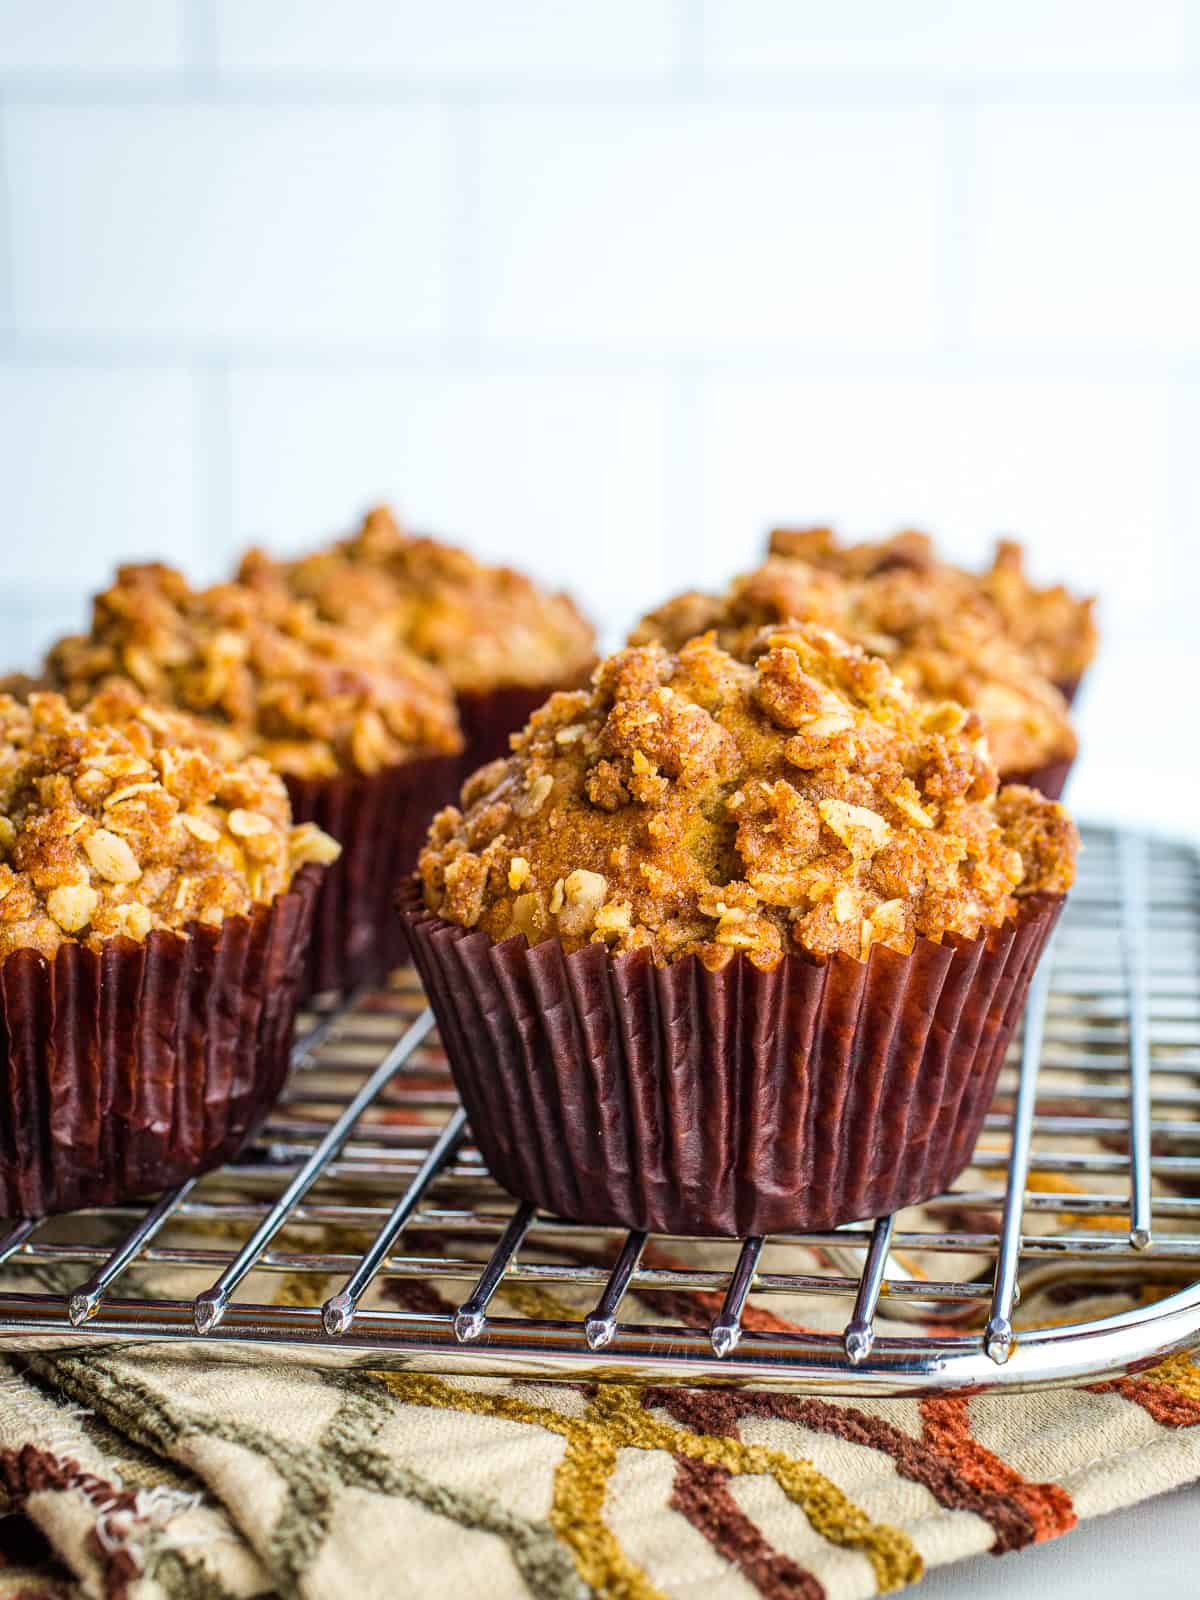 Zucchini crumb muffins cooling on a rack.